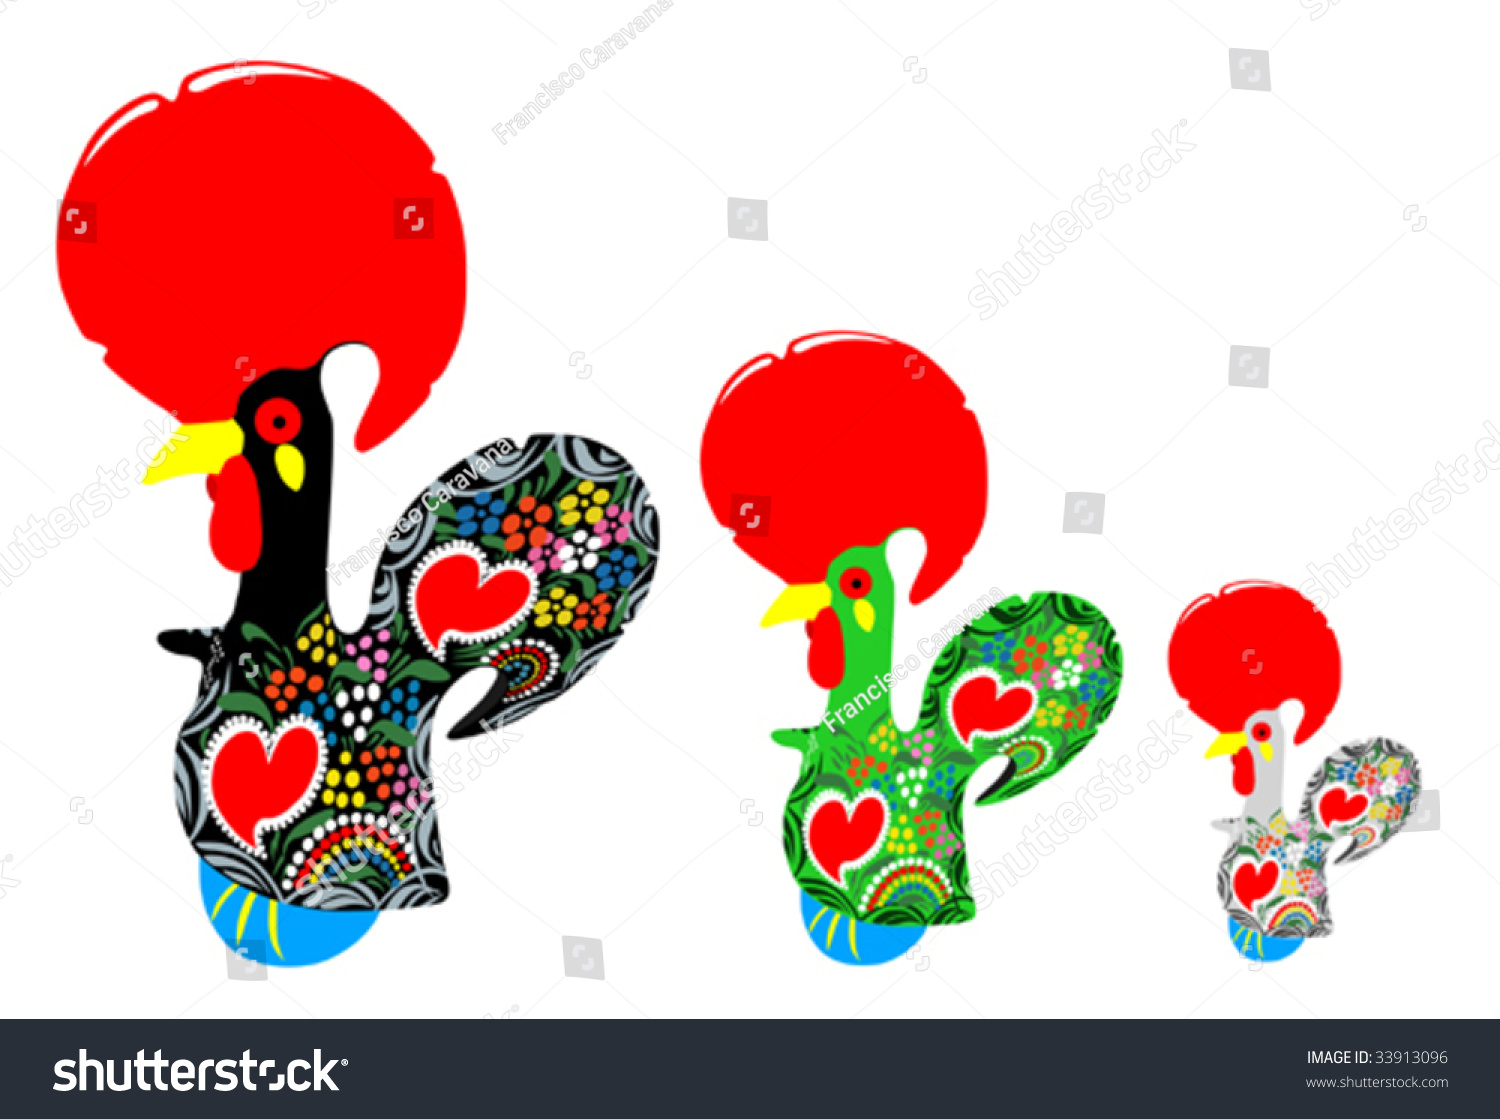 portuguese rooster clipart - photo #14